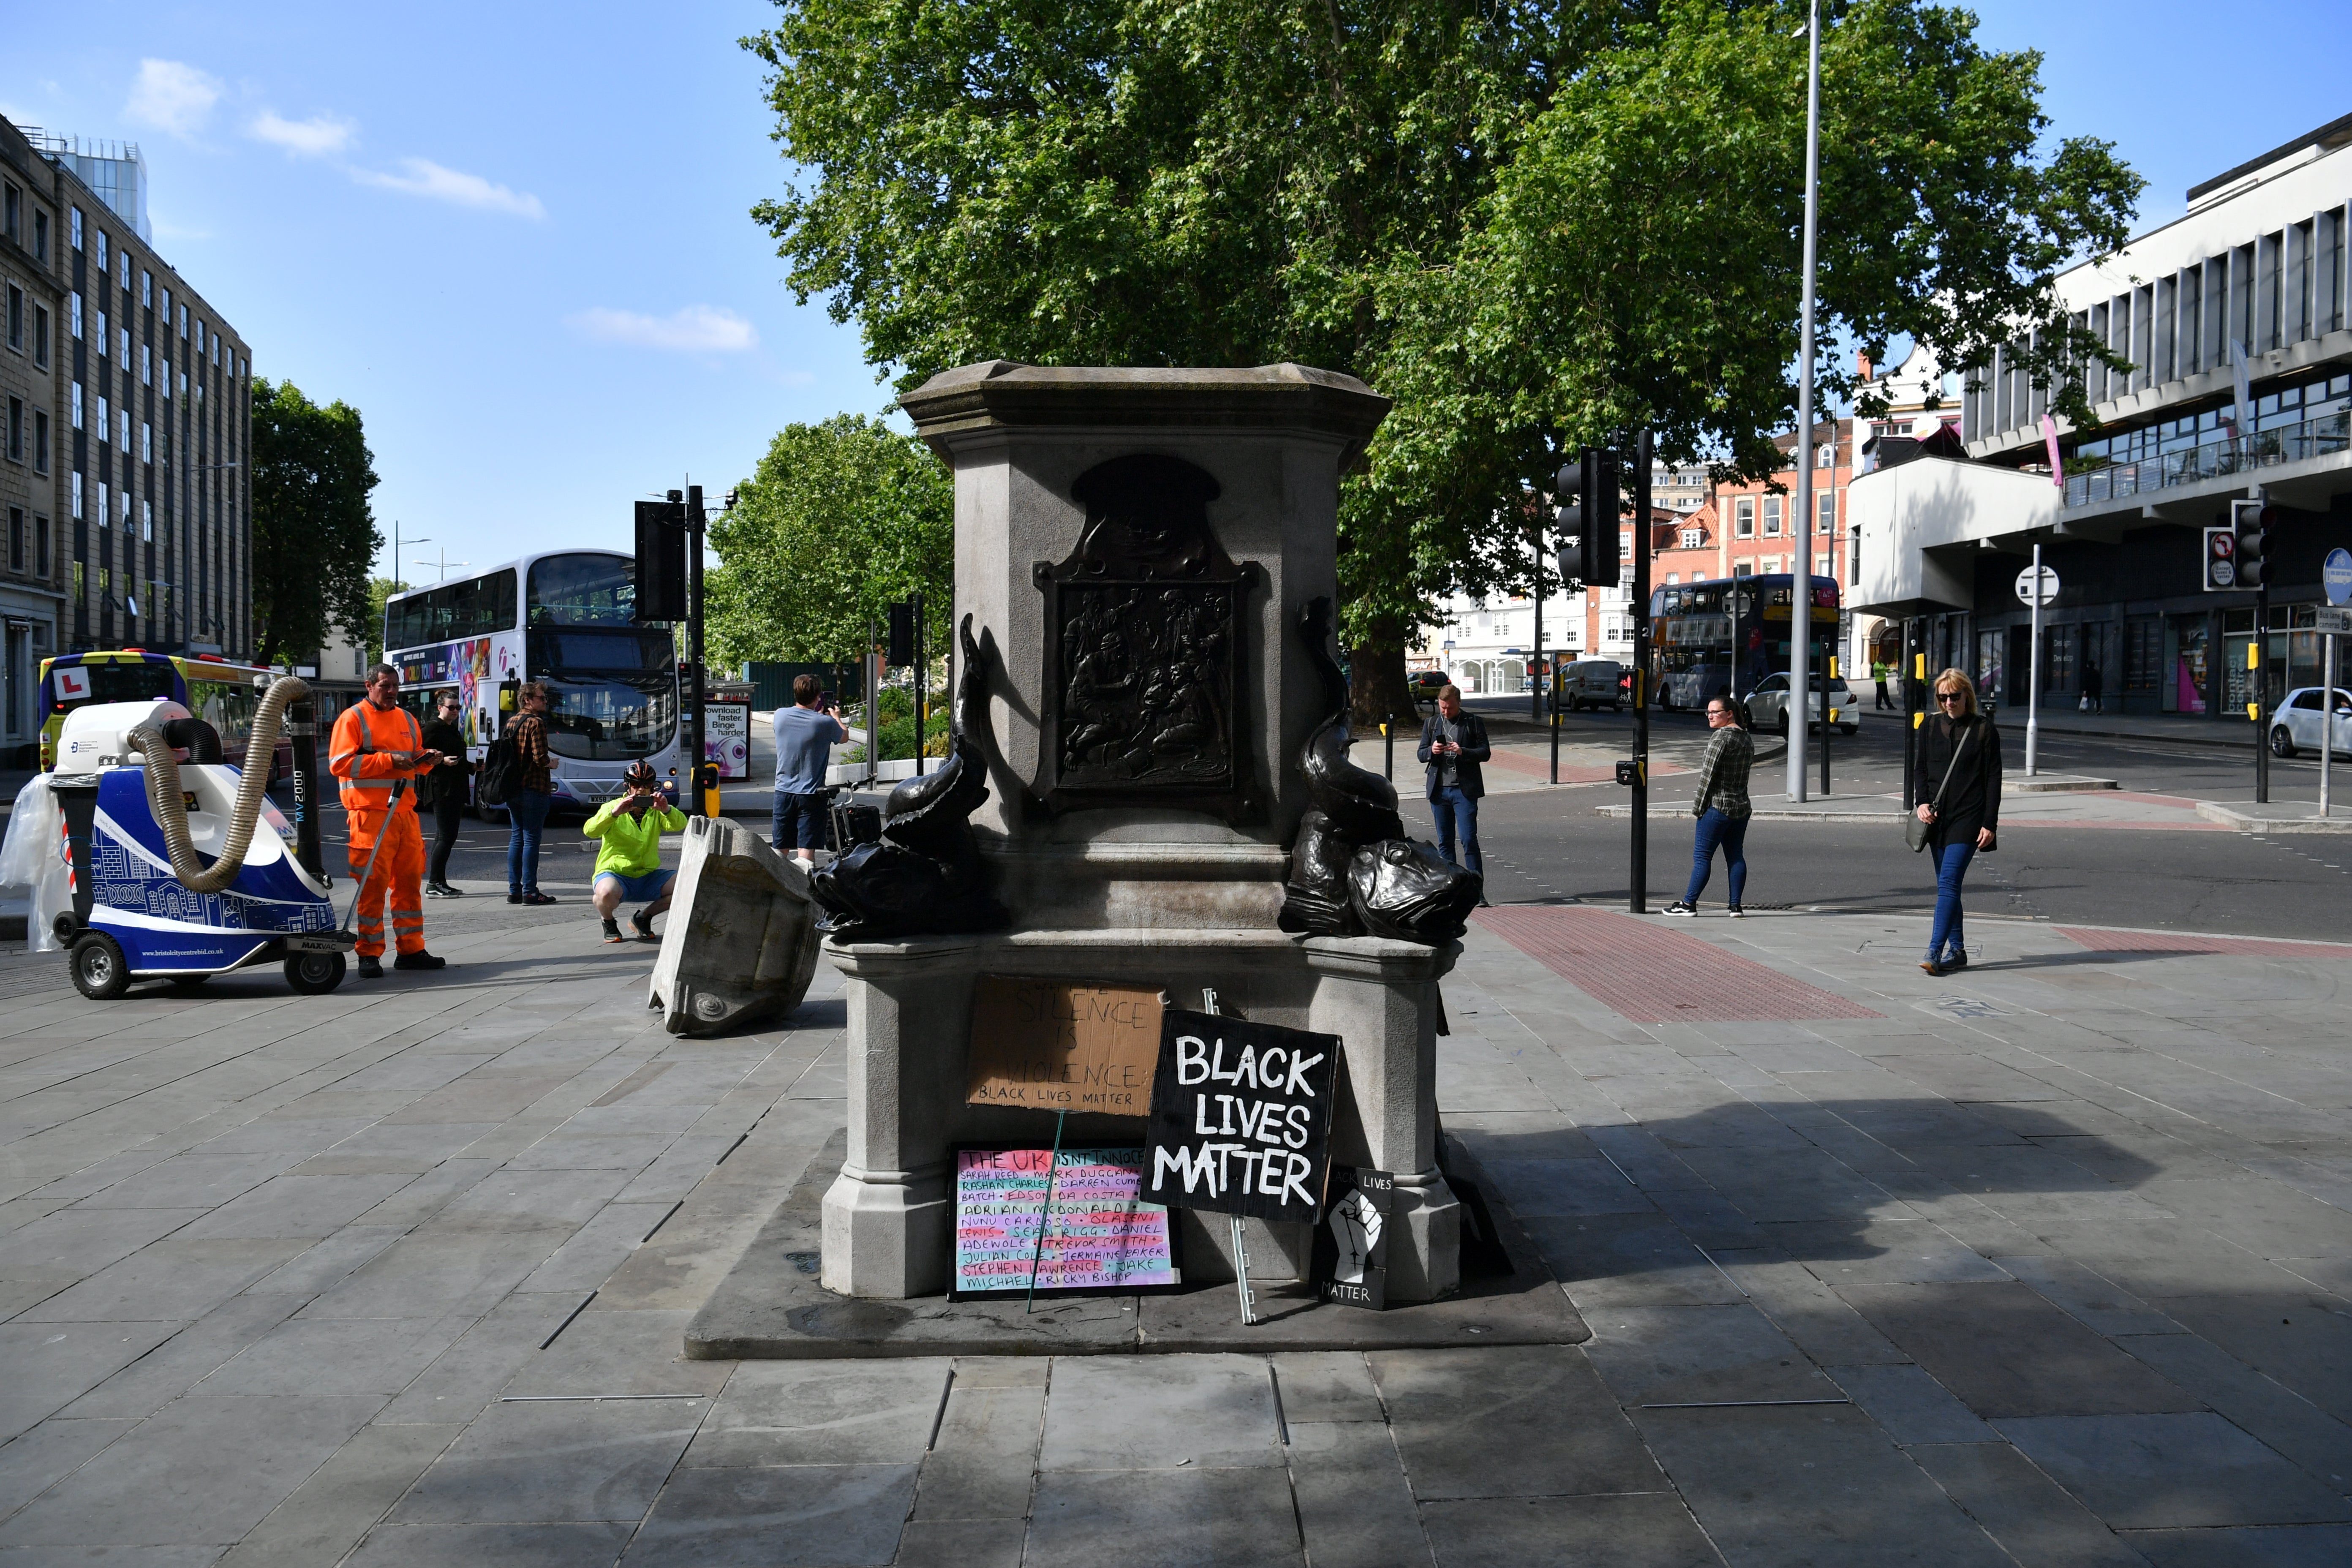 The commission is recommending the Colston plinth remains empty (Ben Birchall/PA)